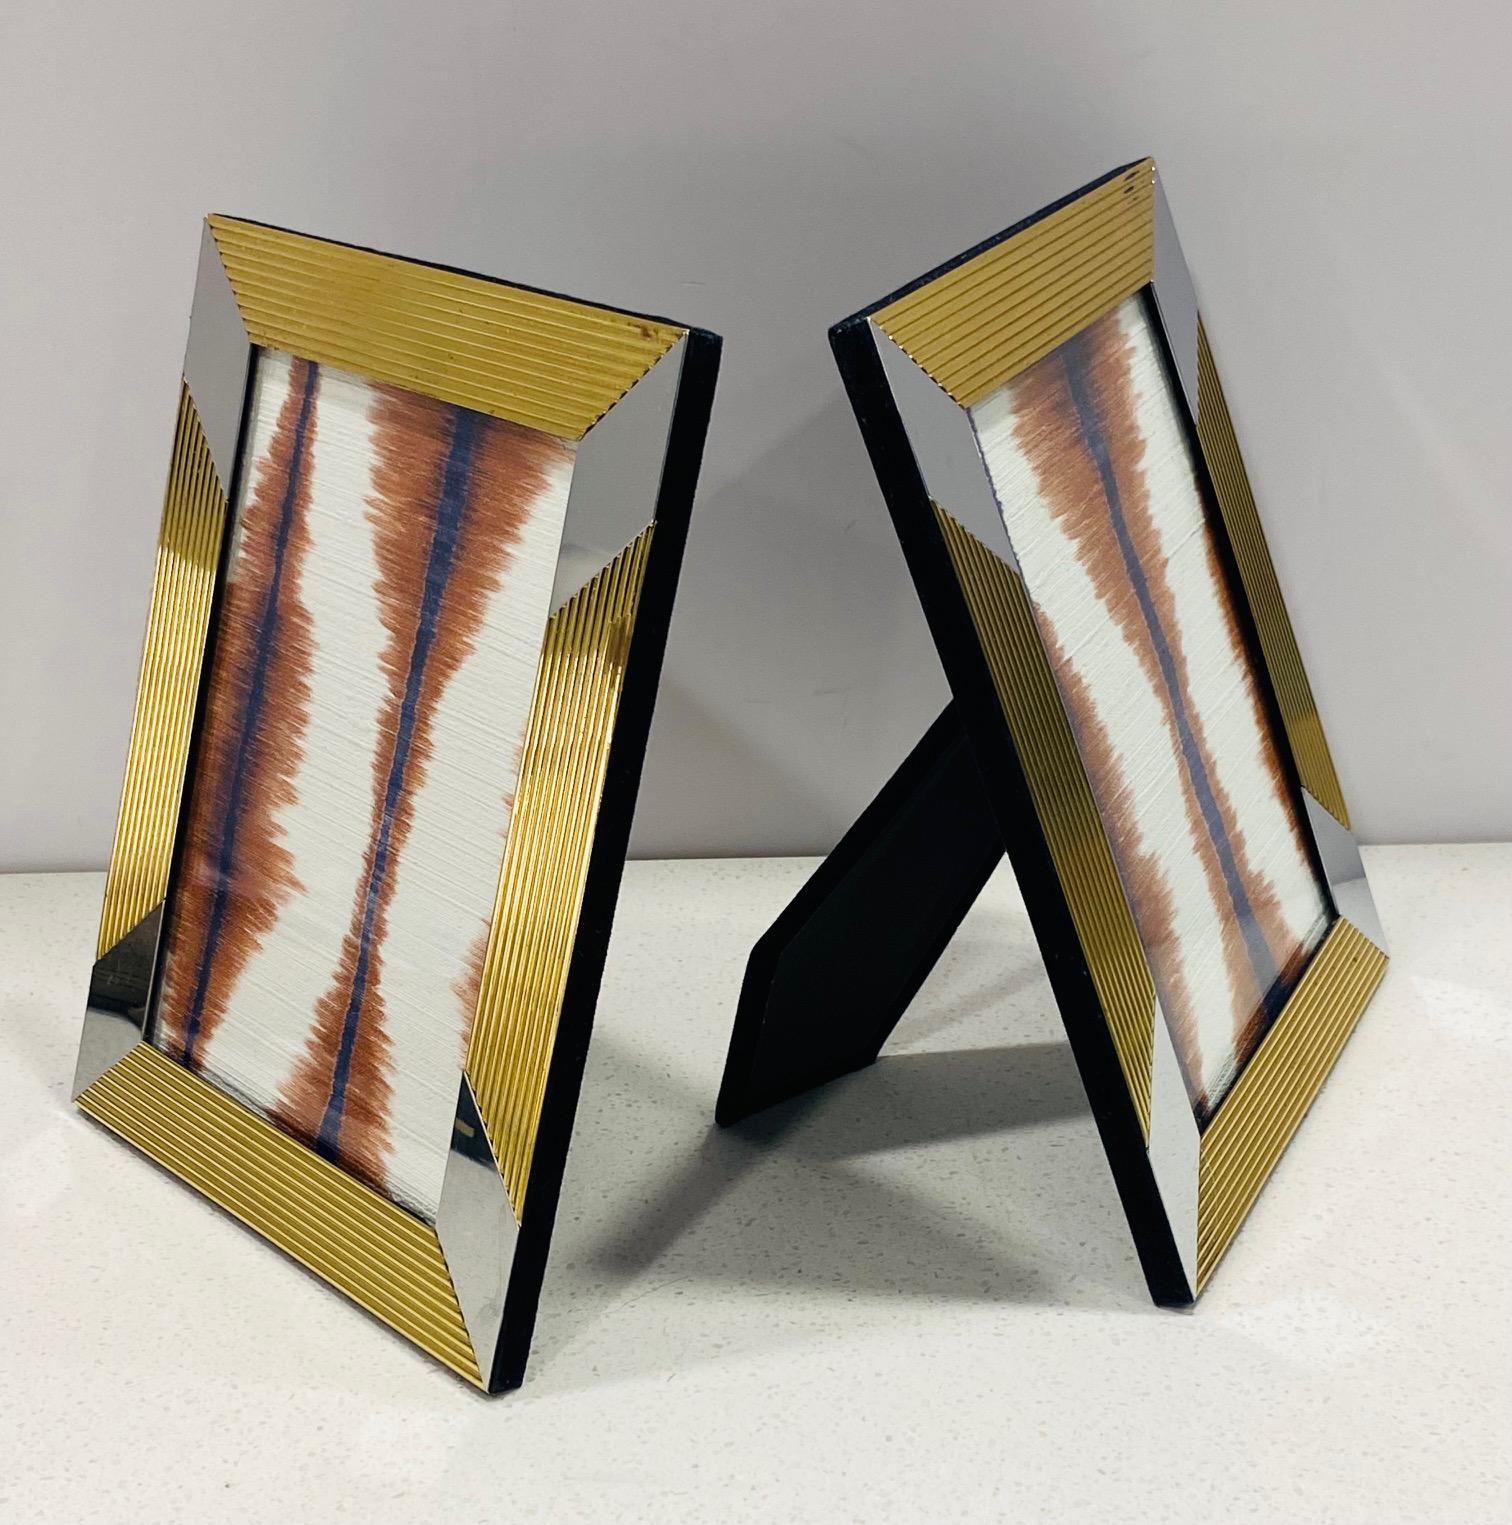 Mid-Century Modern solid brass pictures frames with geometric design. Hand polished and lacquer coated frames featuring fluted metal in gold with chrome bands, and black velvet backing. The frames are 8.75